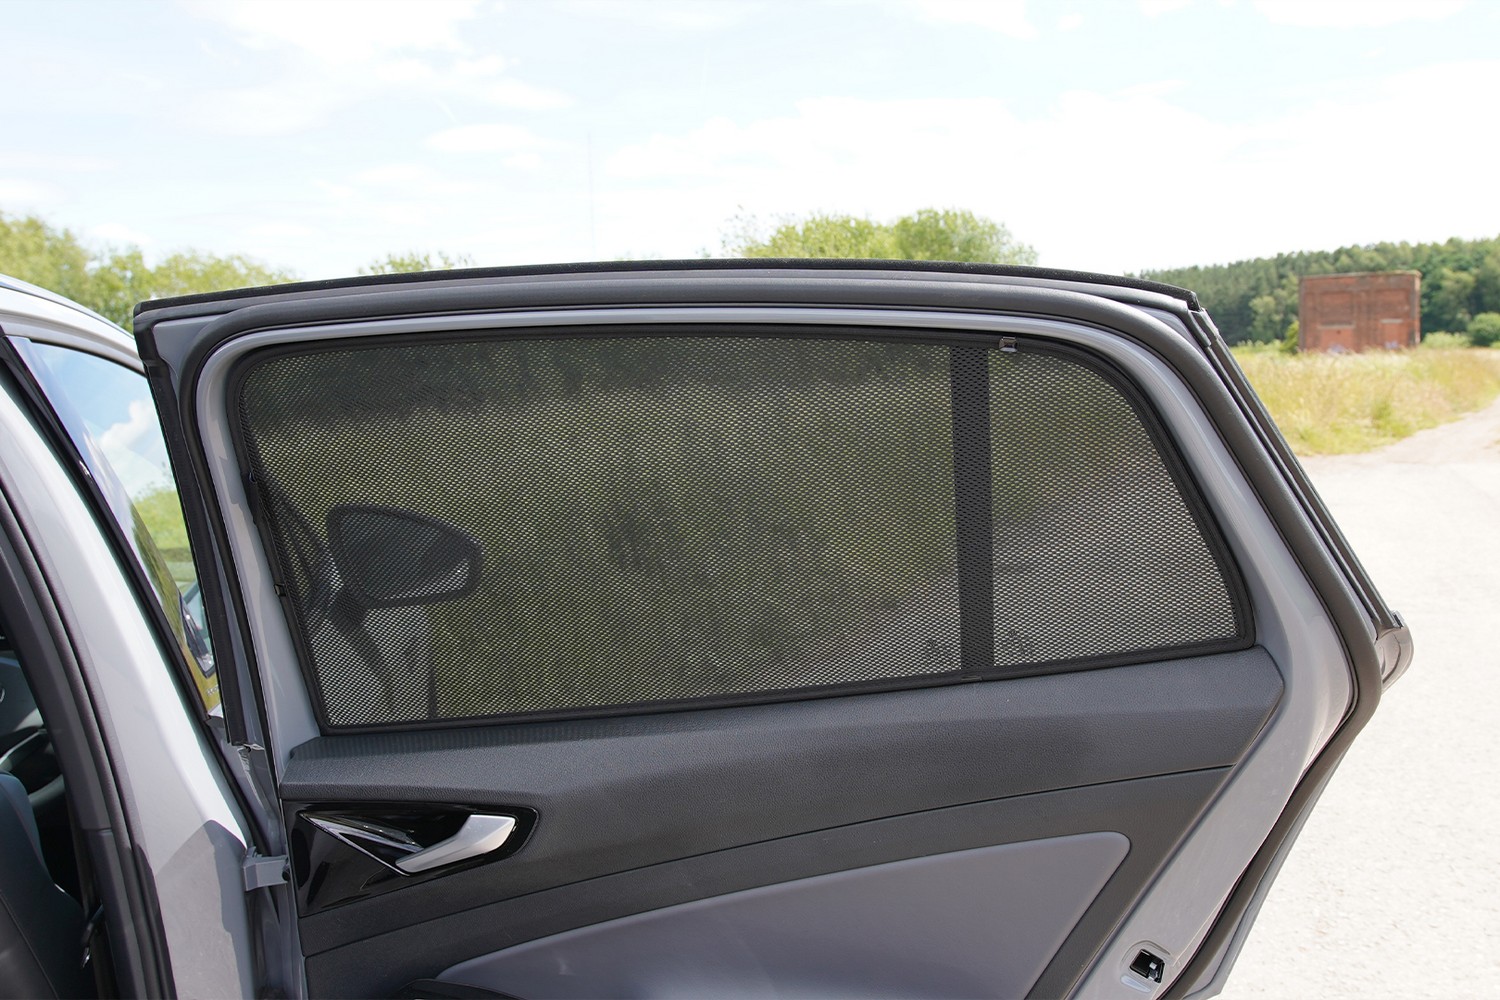 Sun shades suitable for Volkswagen ID.5 2022-present Car Shades - rear side doors